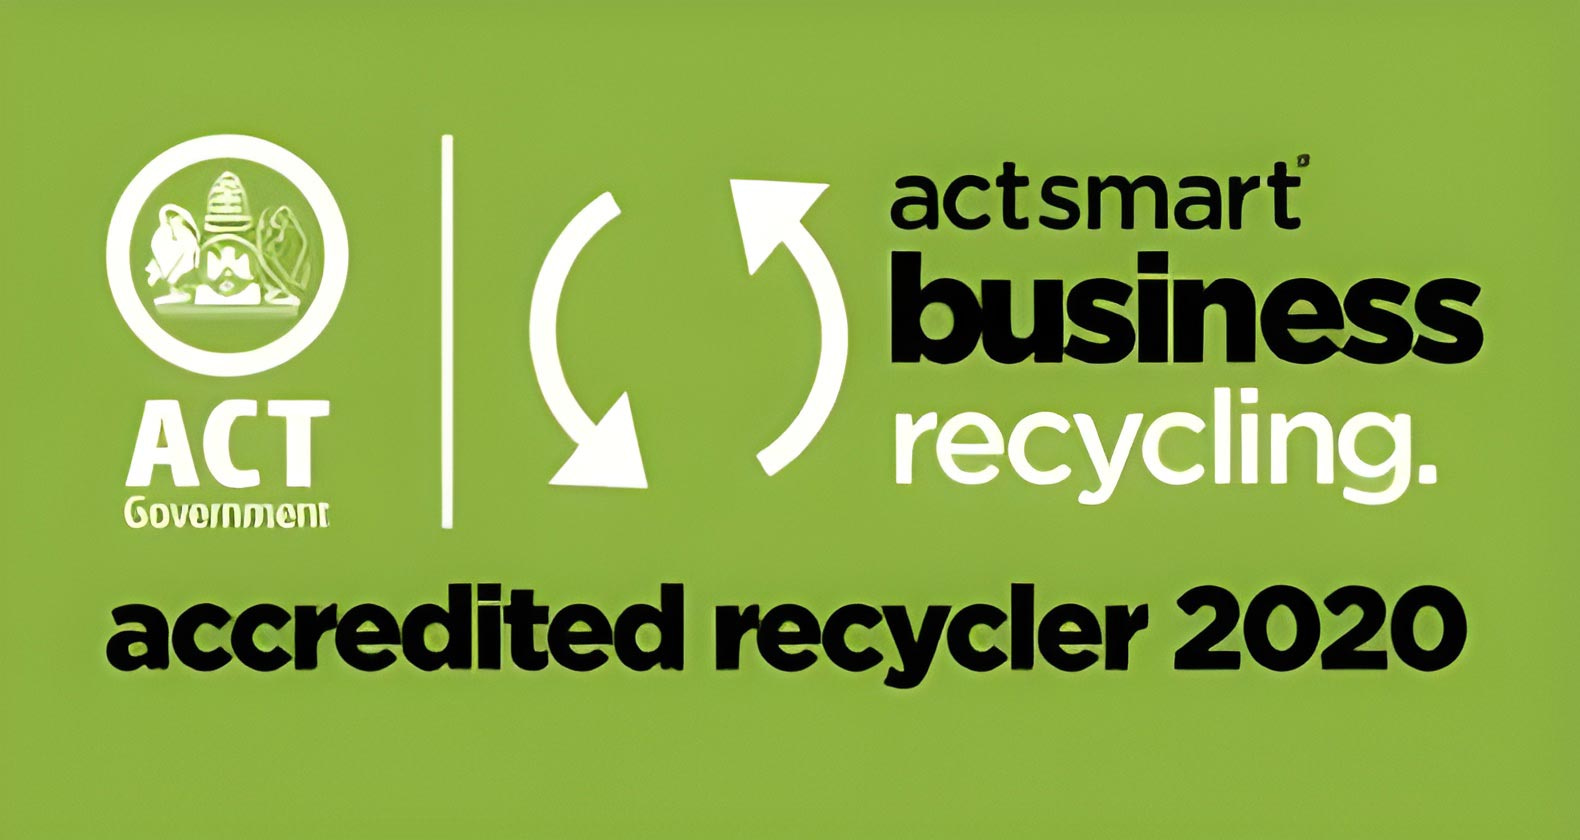 actsmart business recycling accredited recycler for 2020 banner logo